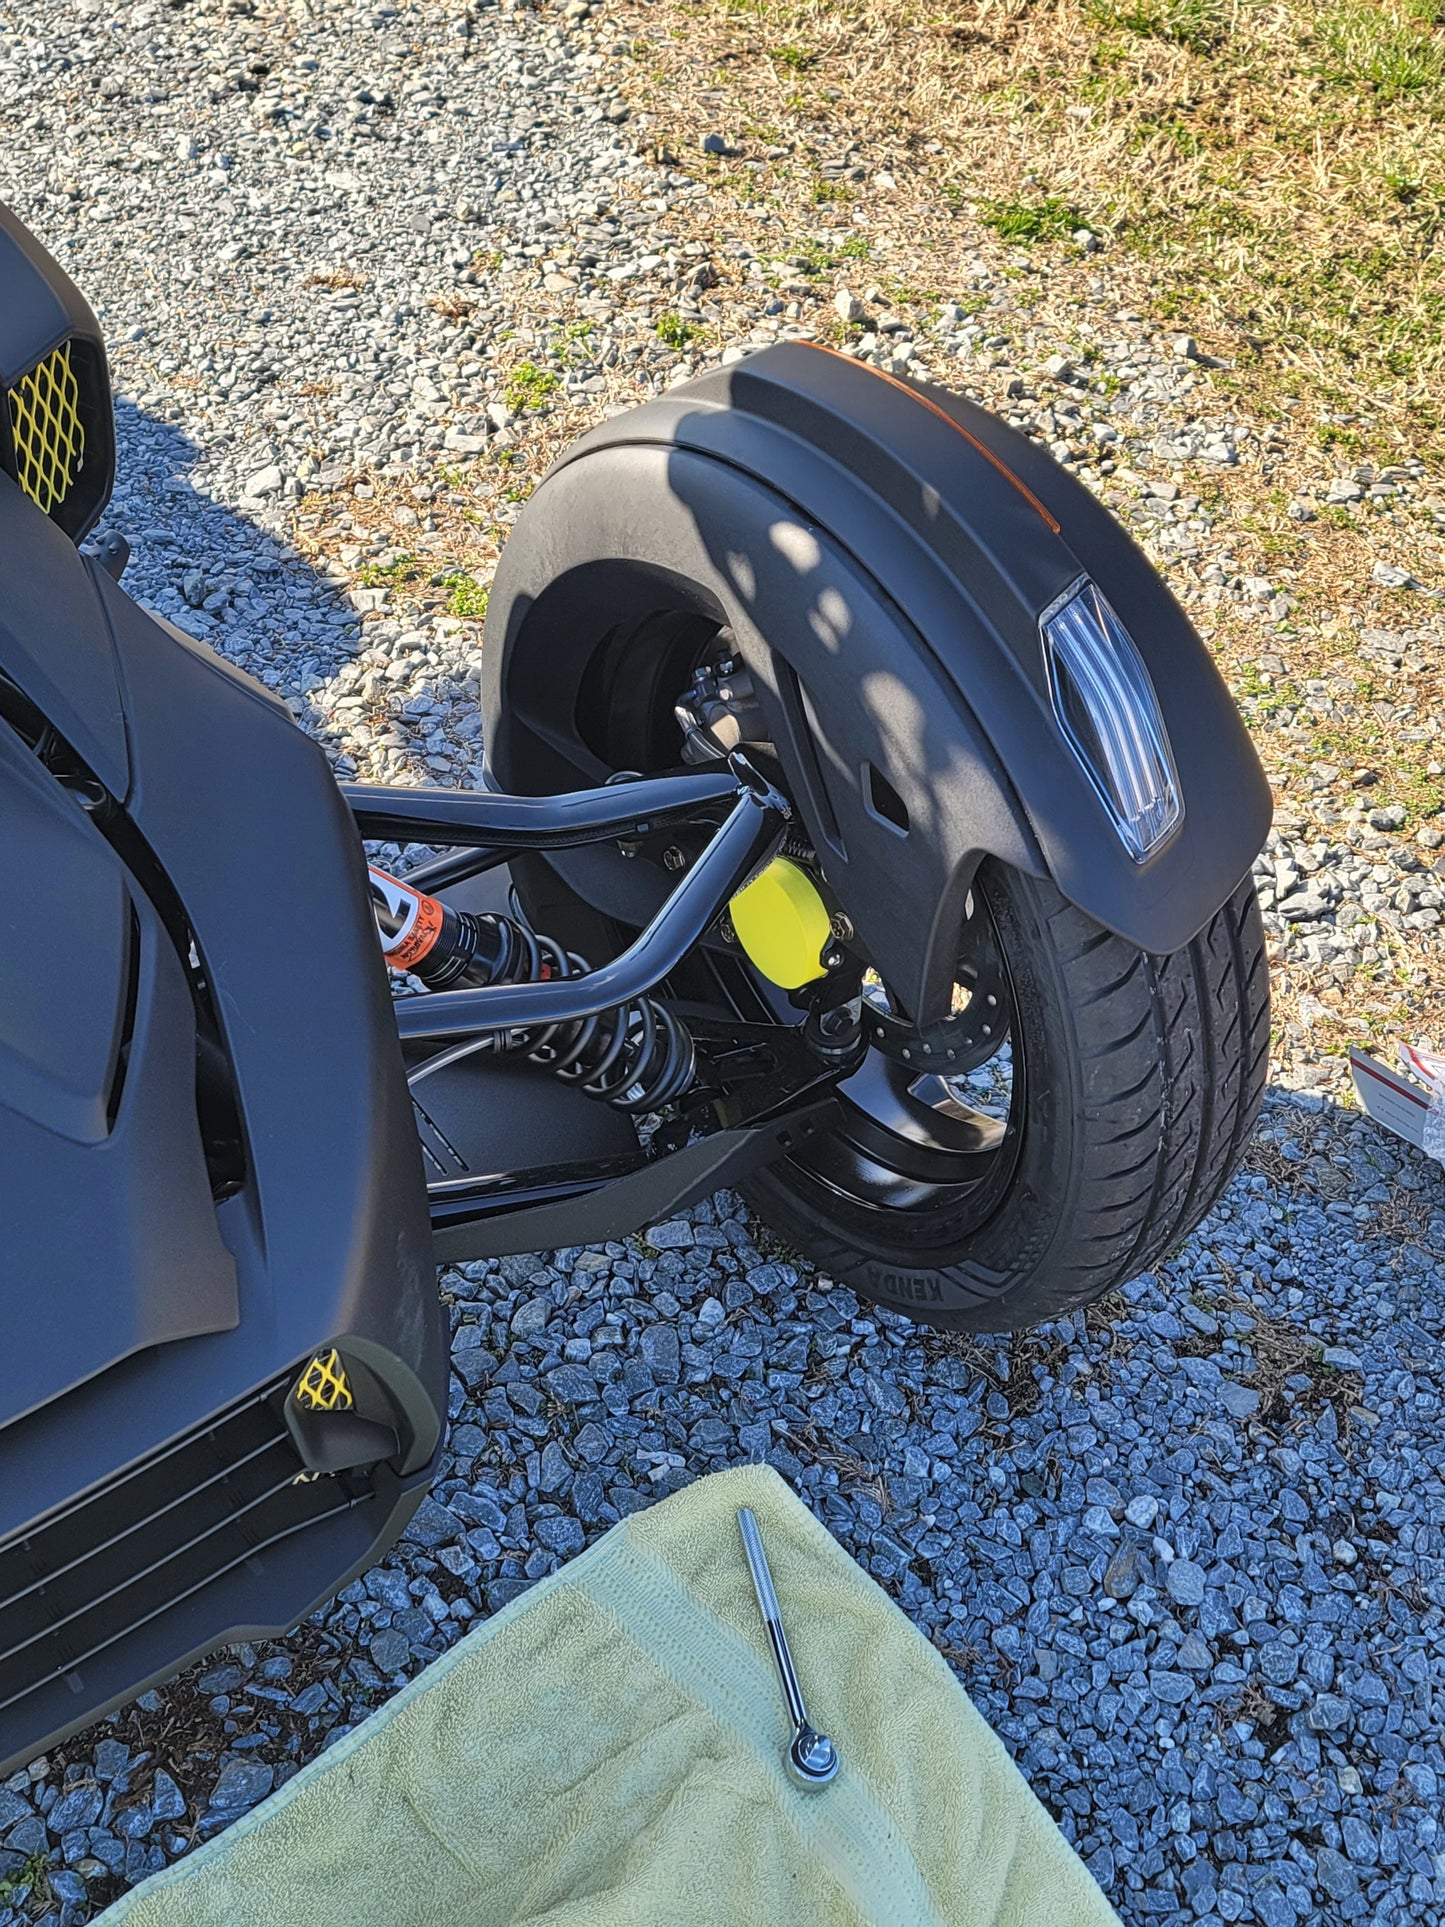 FRONT HUB COVERS FOR CAN-AM RYKER sold as a set of 2